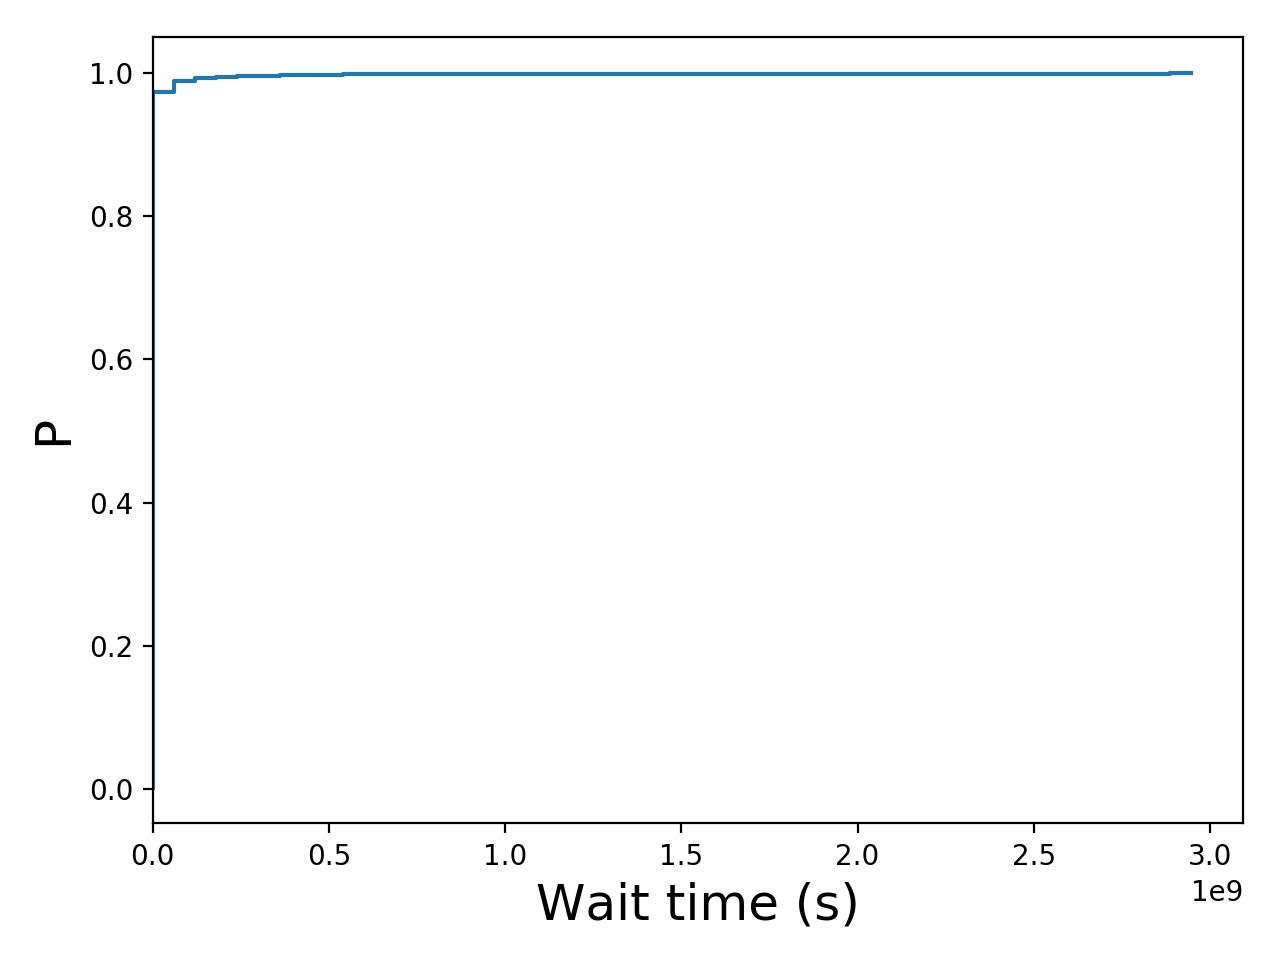 Task wait time CDF graph for the Two_Sigma_dft trace.